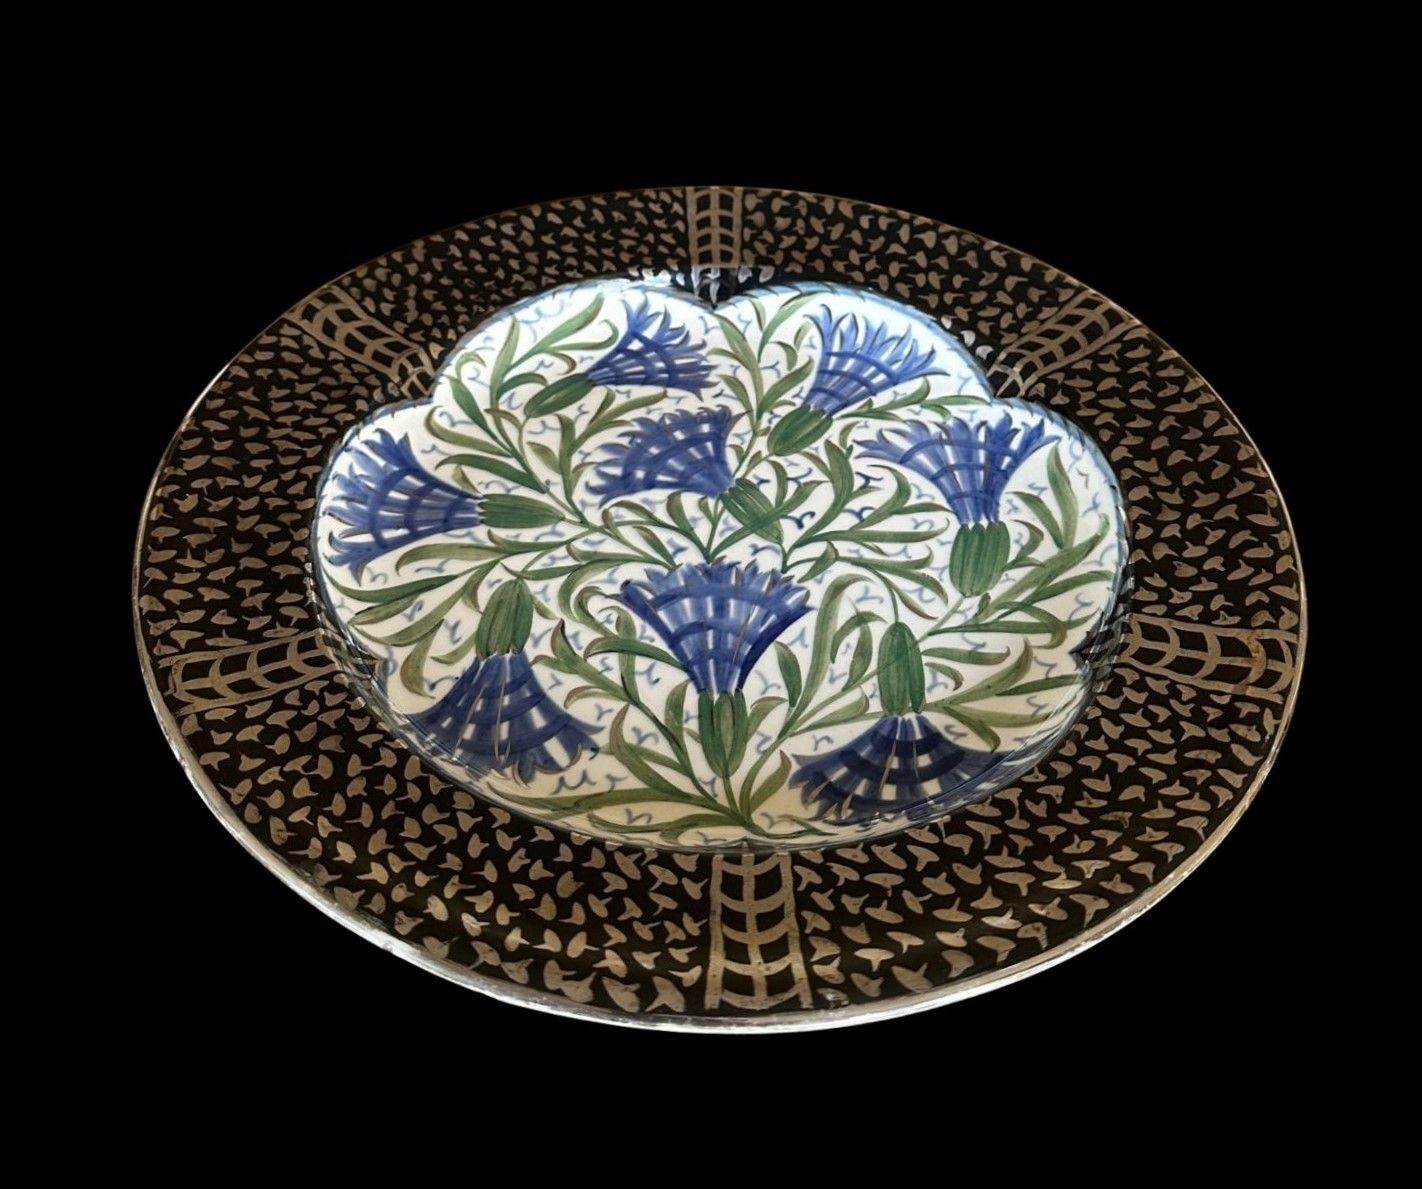 5366
Louise Powell for Wedgwood.
A lustre Plaque in the Persian Palate, decorated with stylised carnations with silver lustre and a black border with silver highlights
32cm wide, 3cm deep
Circa 1920